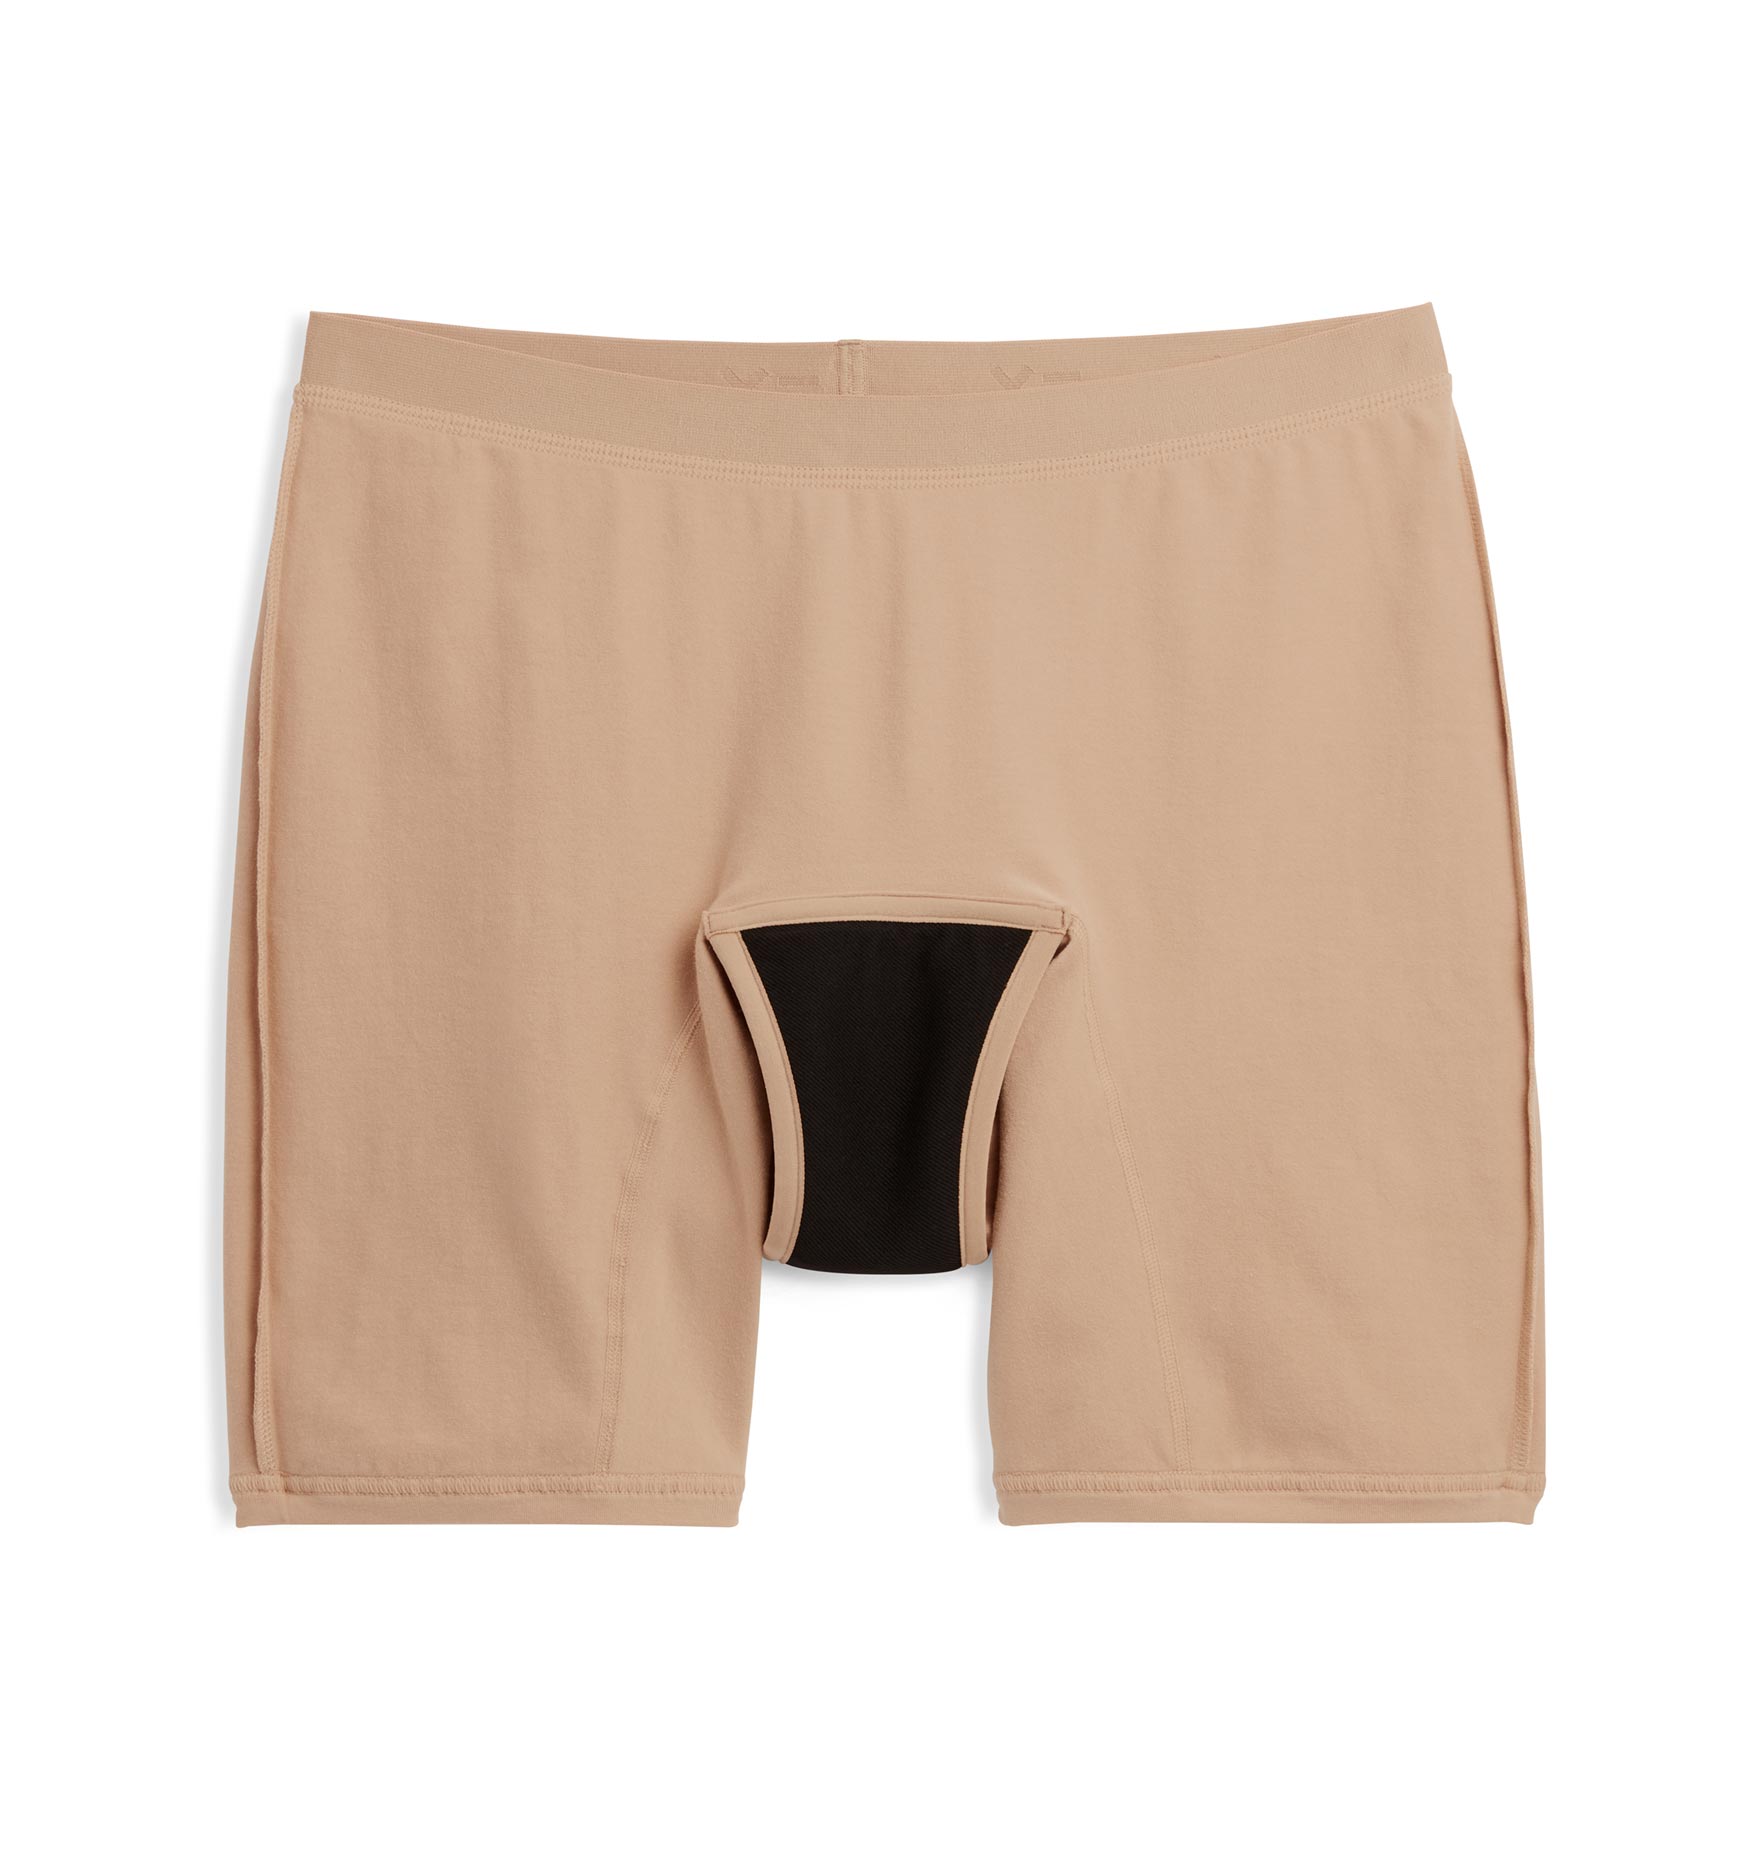 An Absolute Guide On Buying Women's Boxer Briefs & Cotton Boy